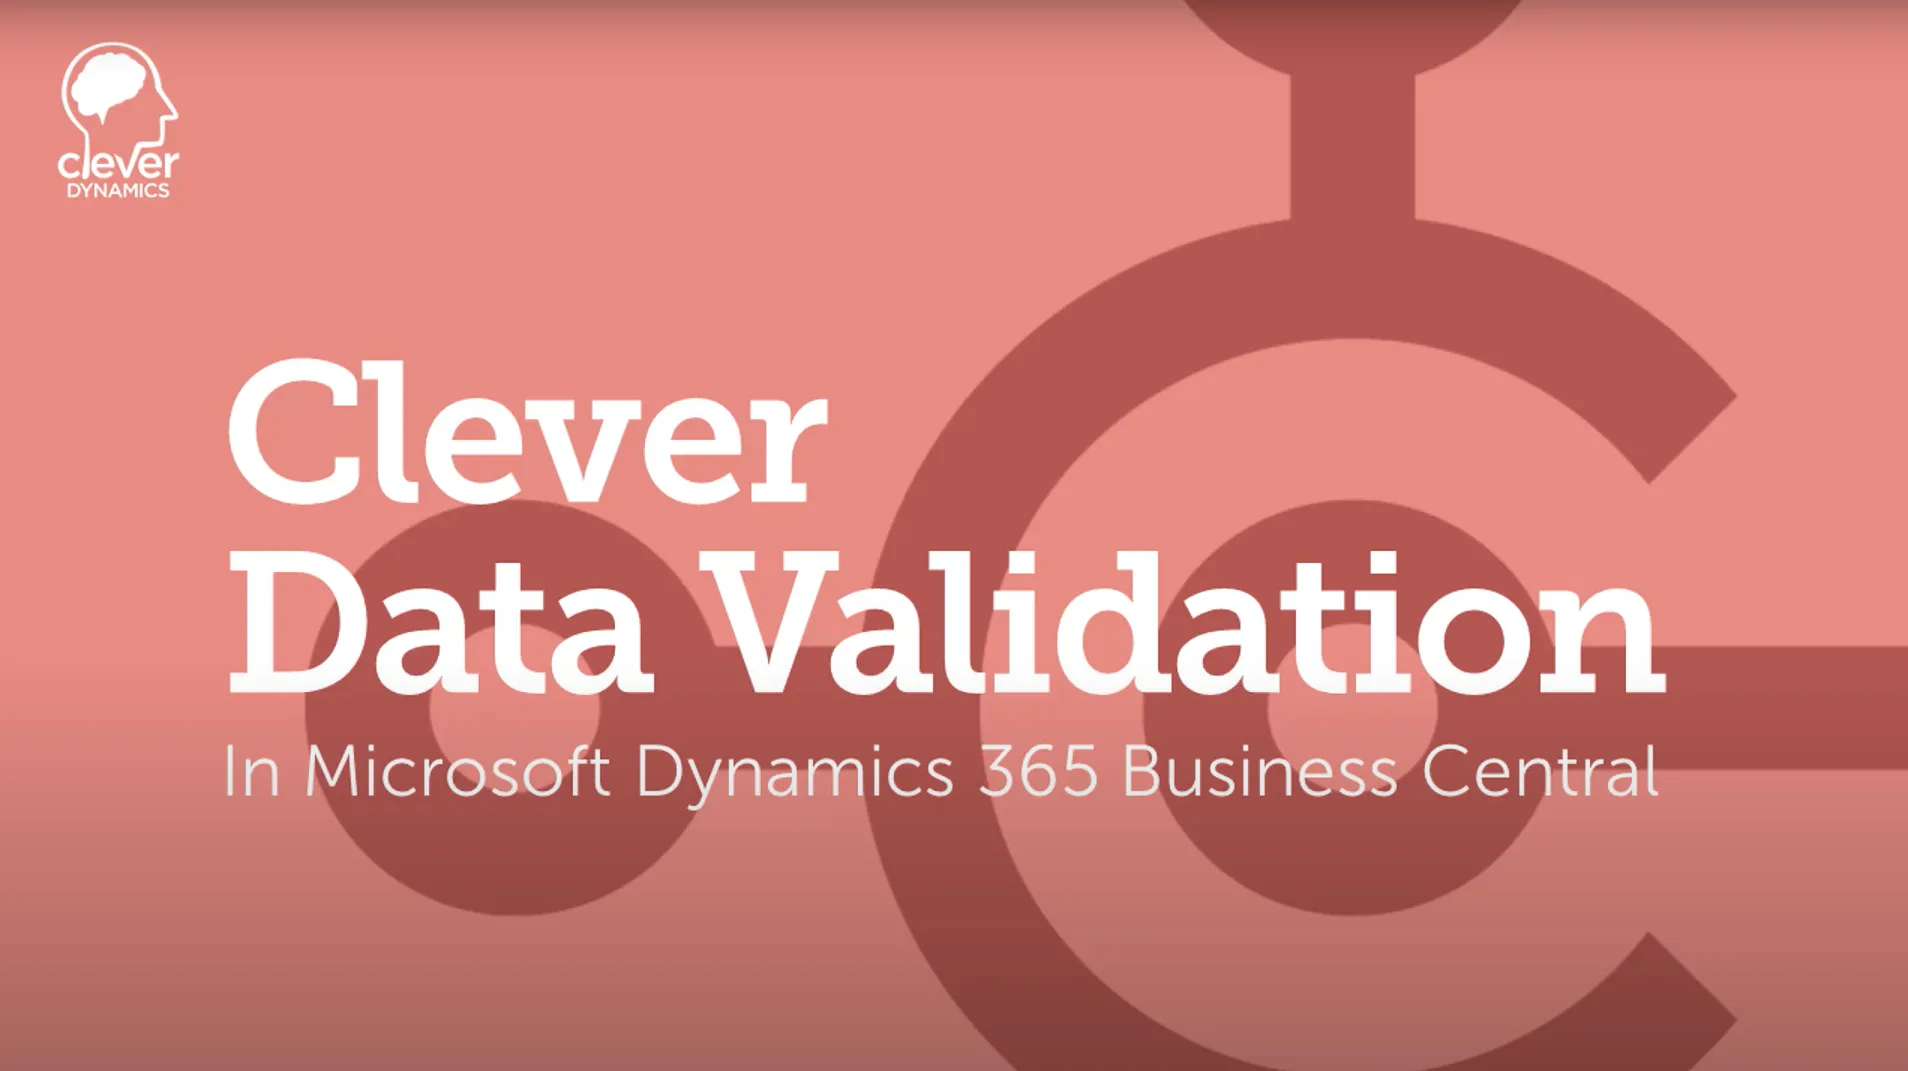 Clever Data Validation by Clever Dynamics for Dynamics 365